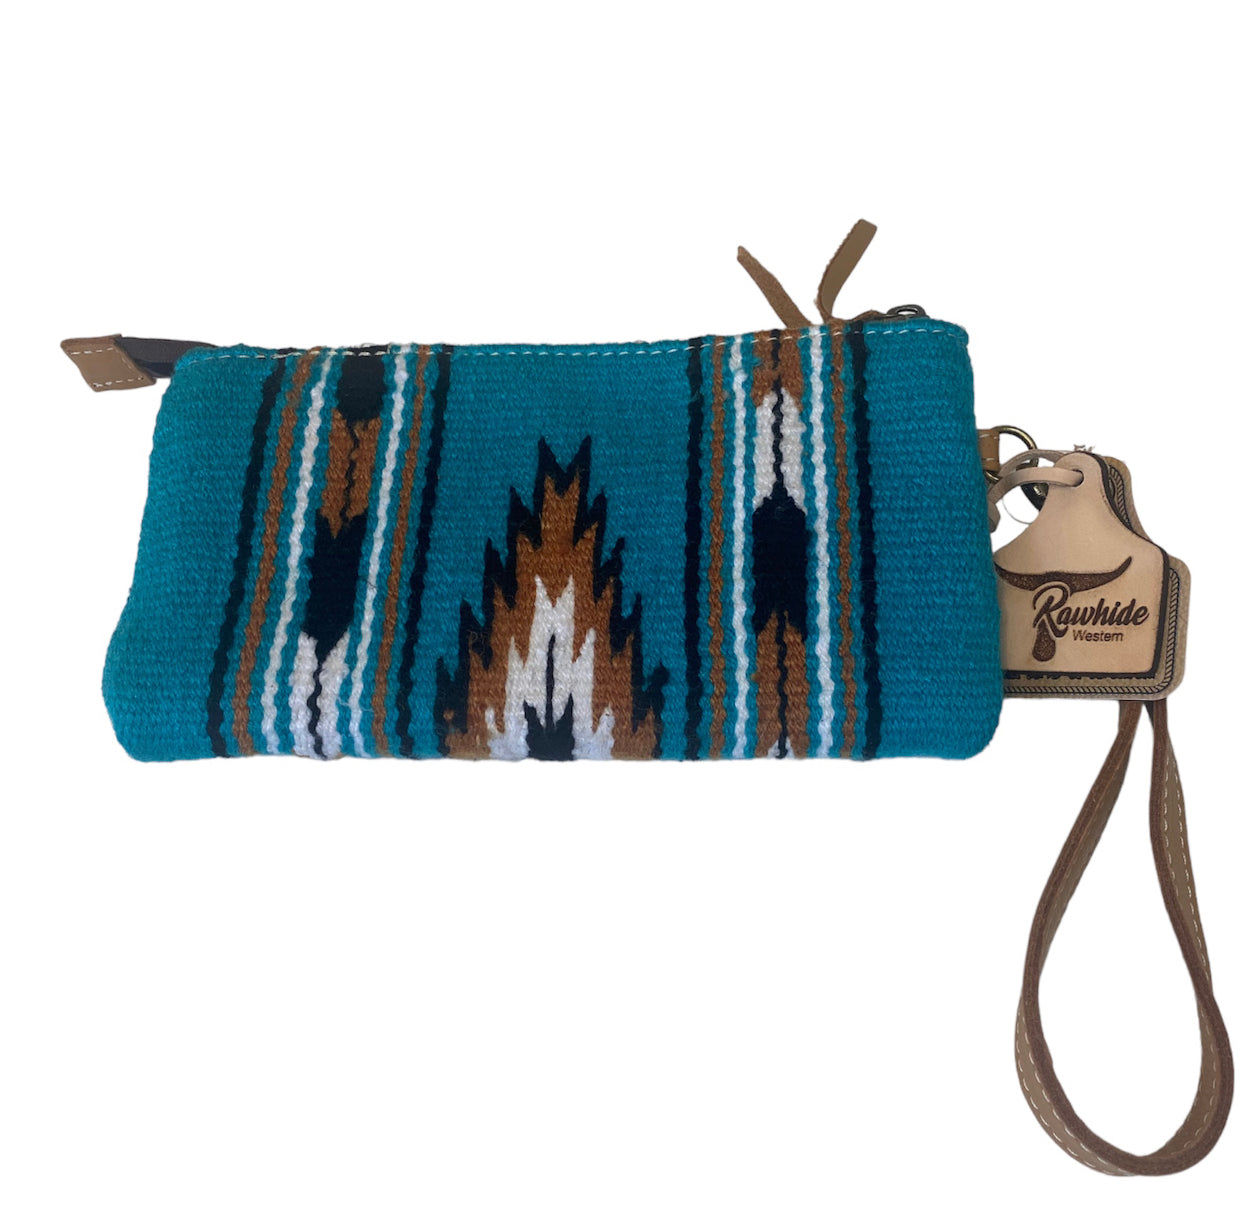 A8274 - Blue Saddle Blanket Large Clutch with Tooled Leather